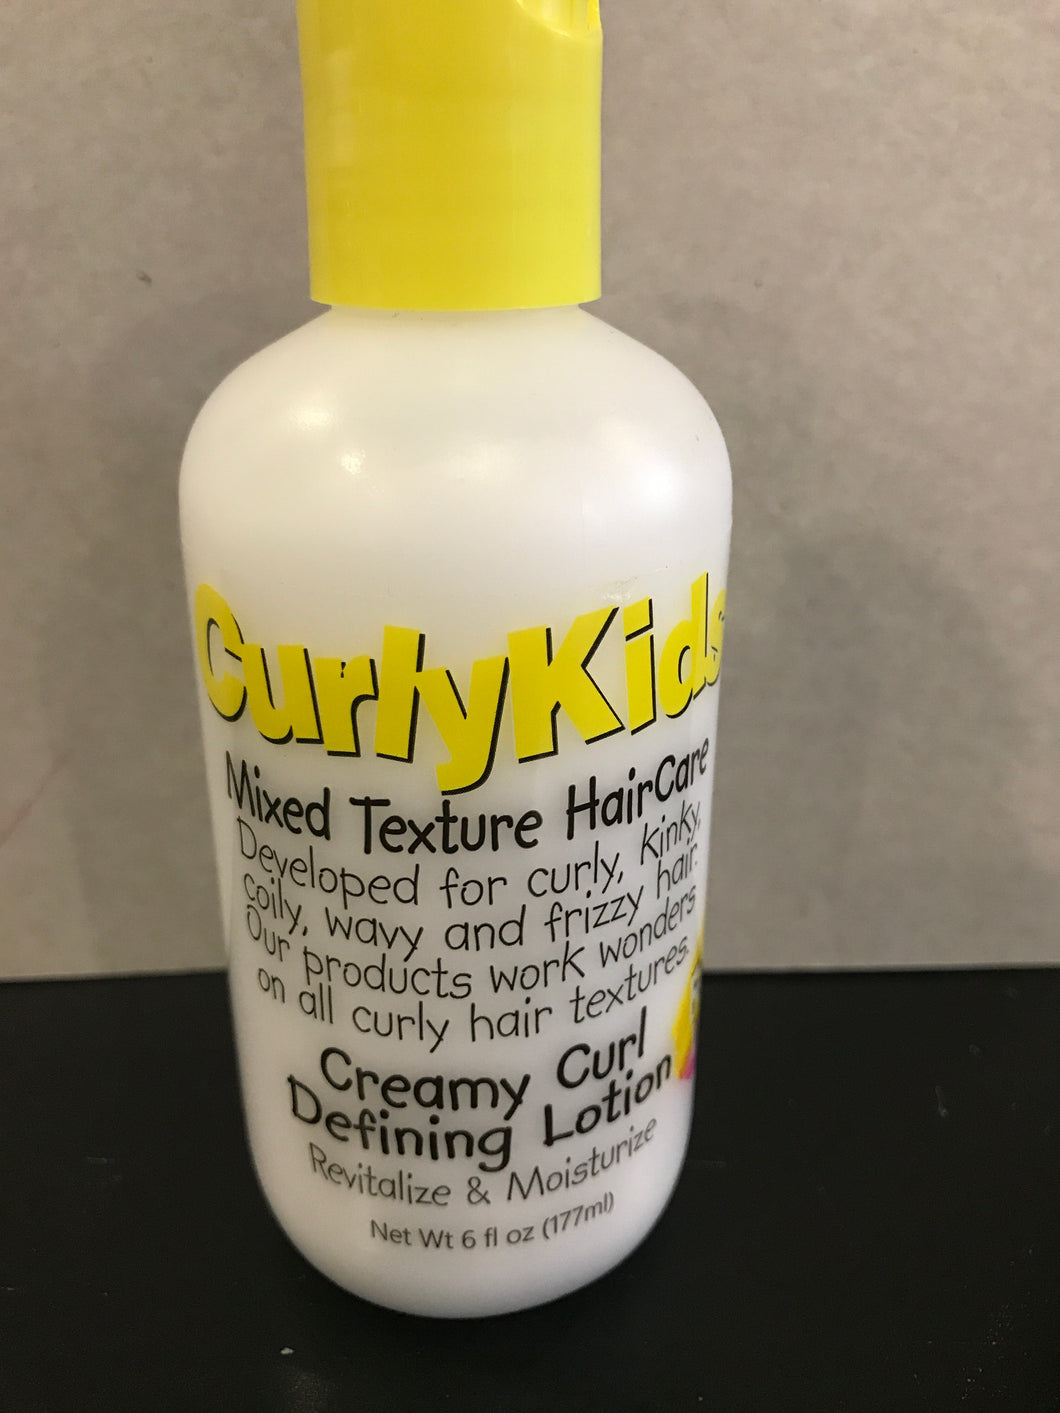 Curly Kids creamy Curl definding lotion